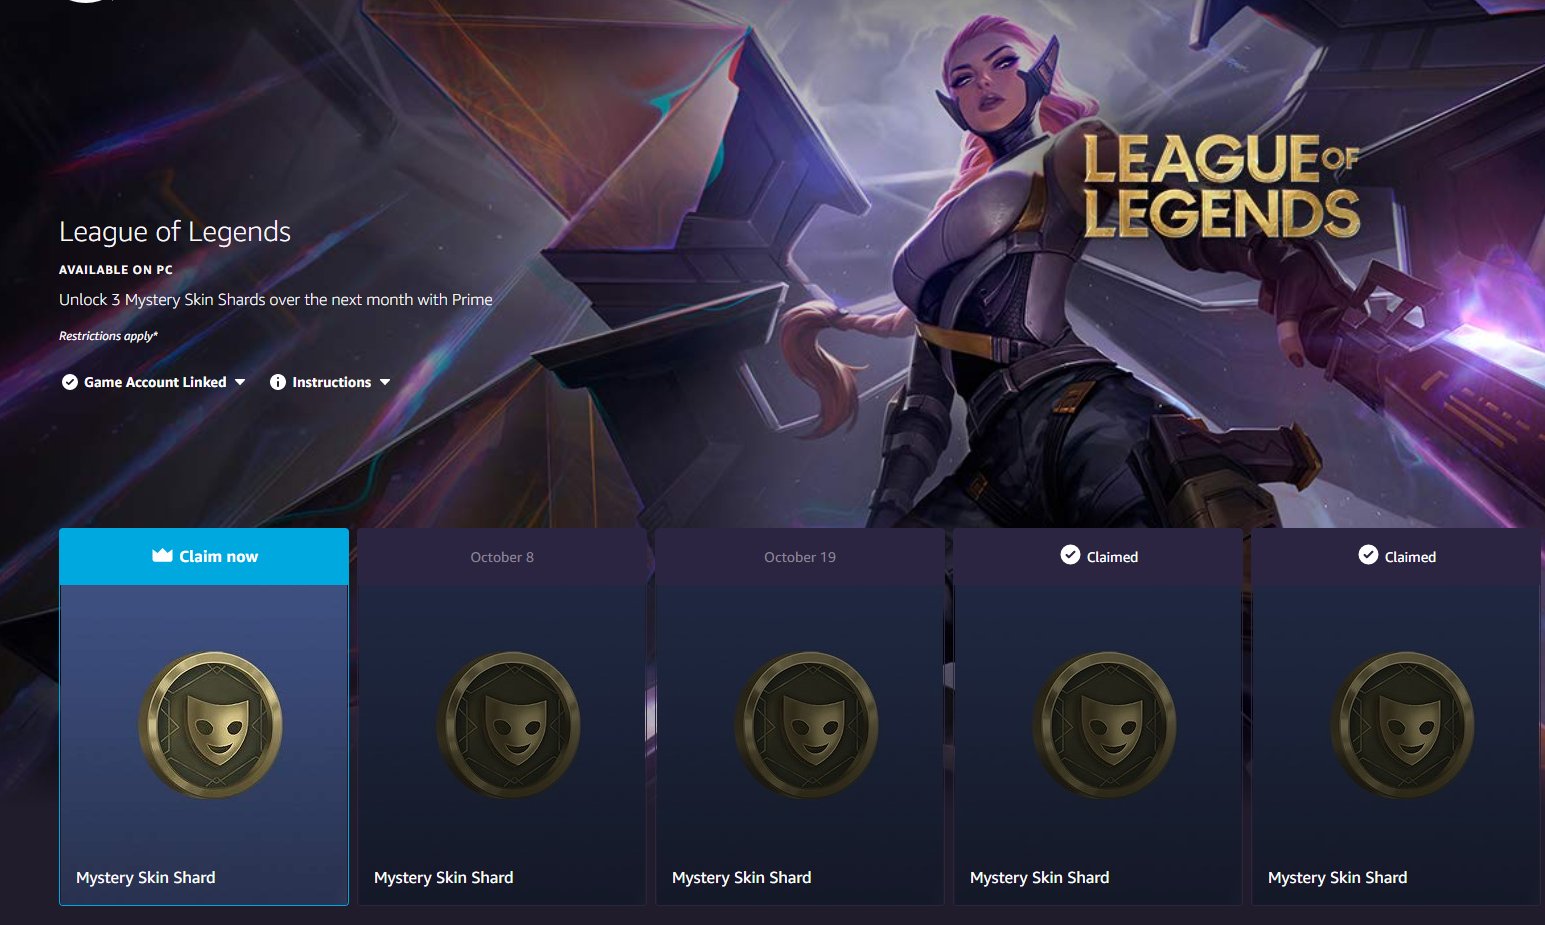 moobeat on X: New LoL Twitch prime loot is up! Get a mystery skin